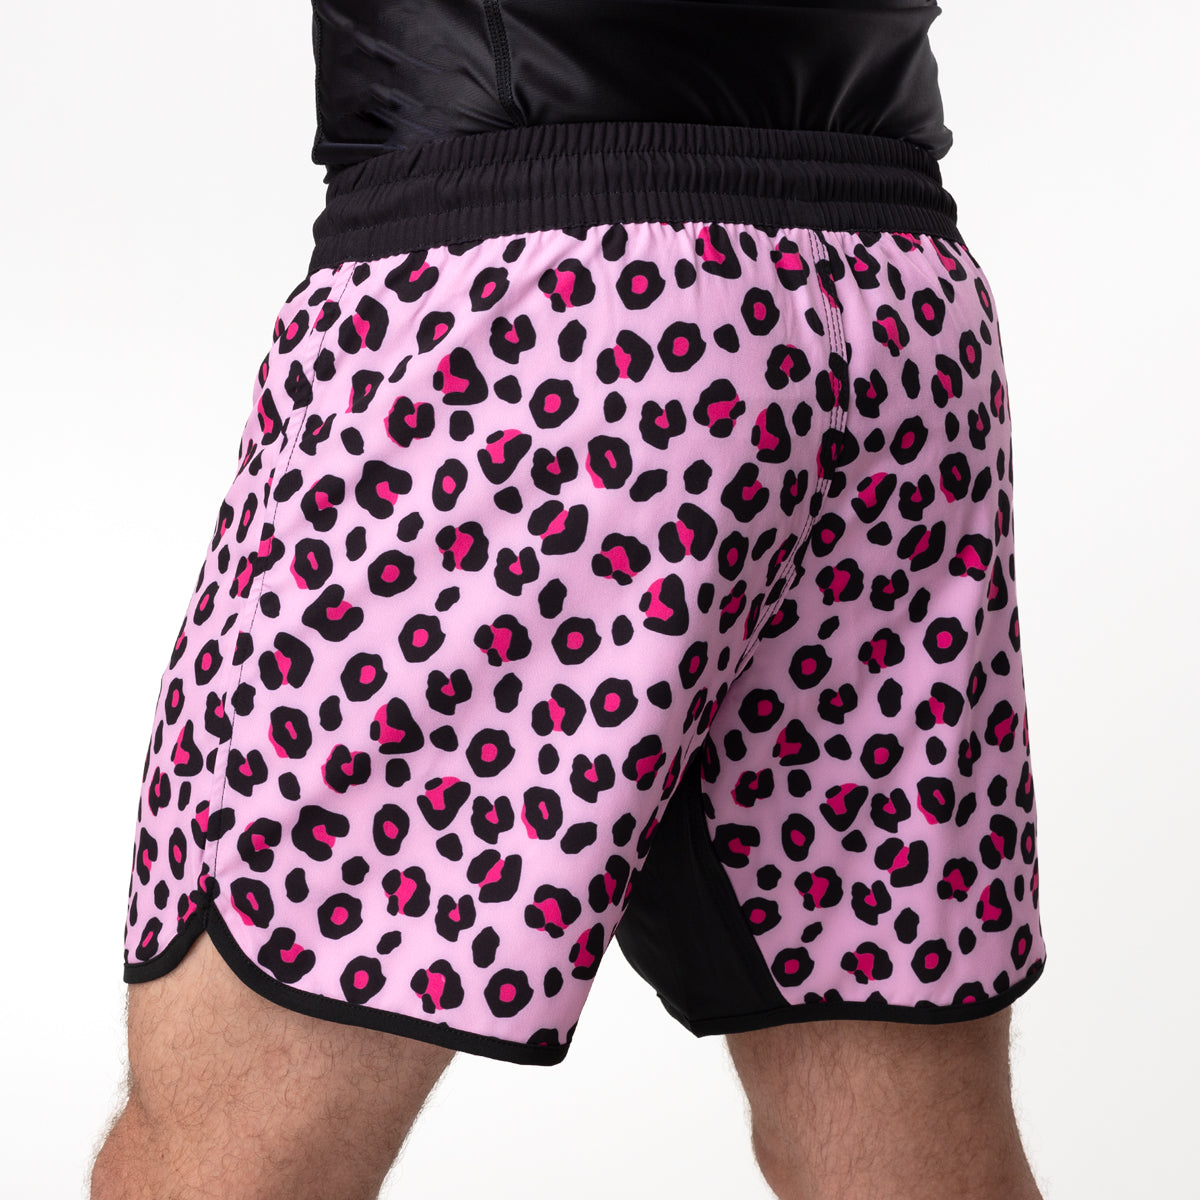 Tatami "Recharge" Fight Shorts - Leopard Pink